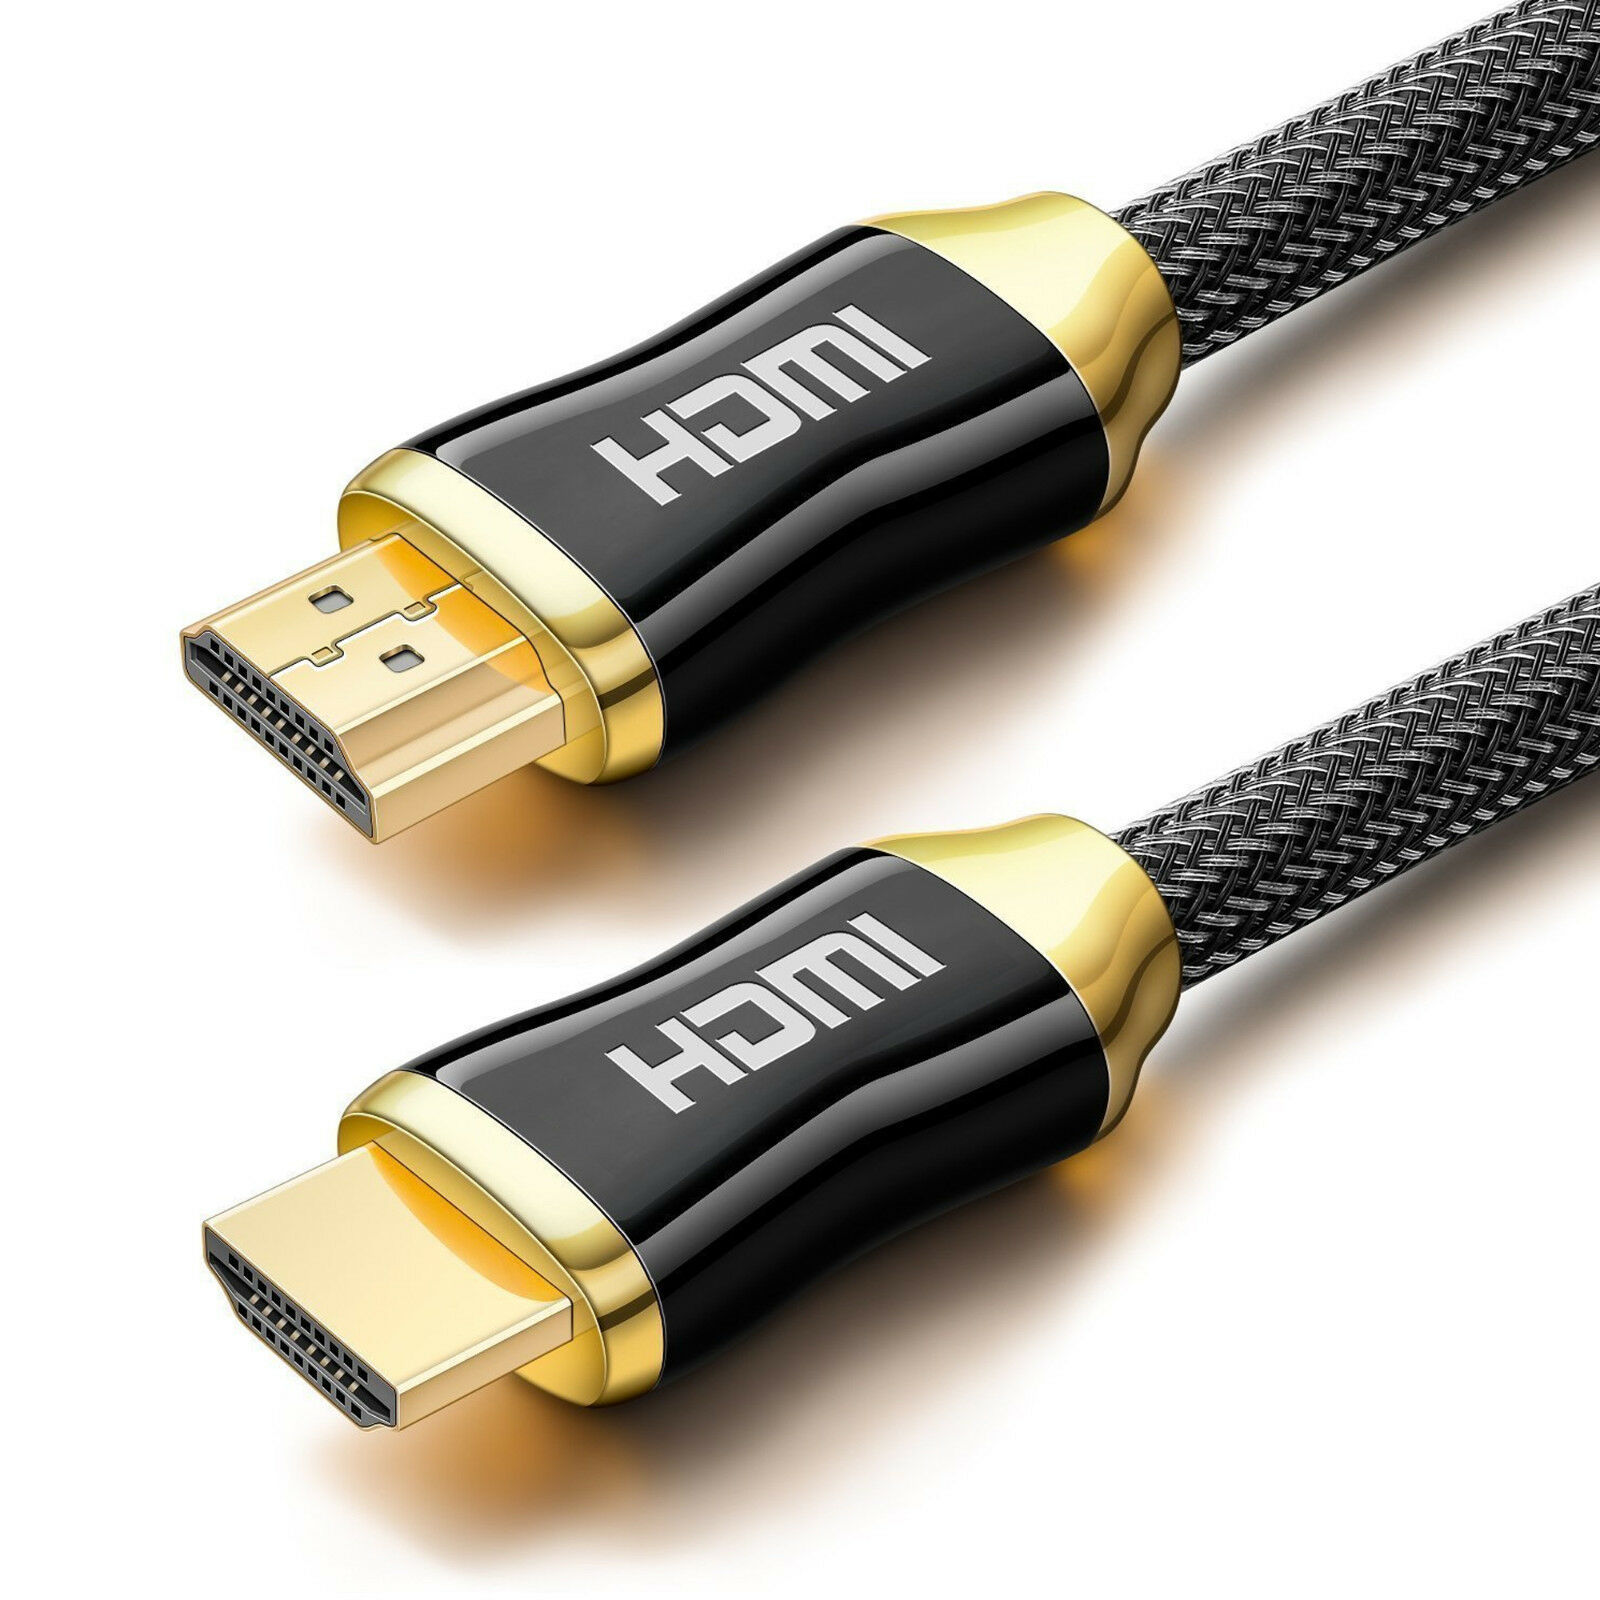 PREMIUM 4K HDMI CABLE 2.0 HIGH SPEED Black PLATED BRAIDED LEAD 3D HDTV 0.5m-5m 